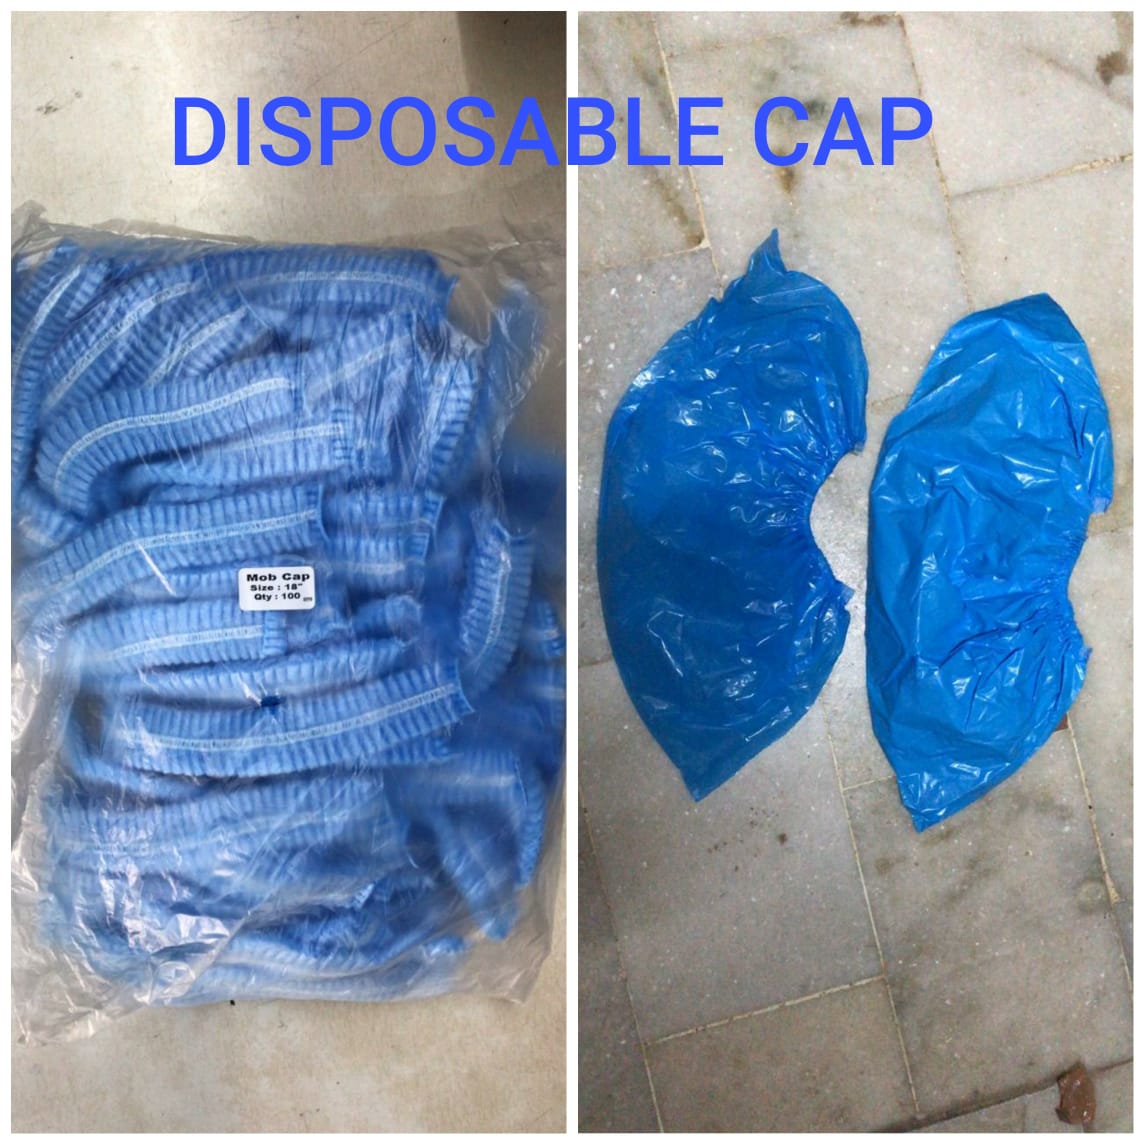 DISPOSABLE CAP AND SHOE COVER